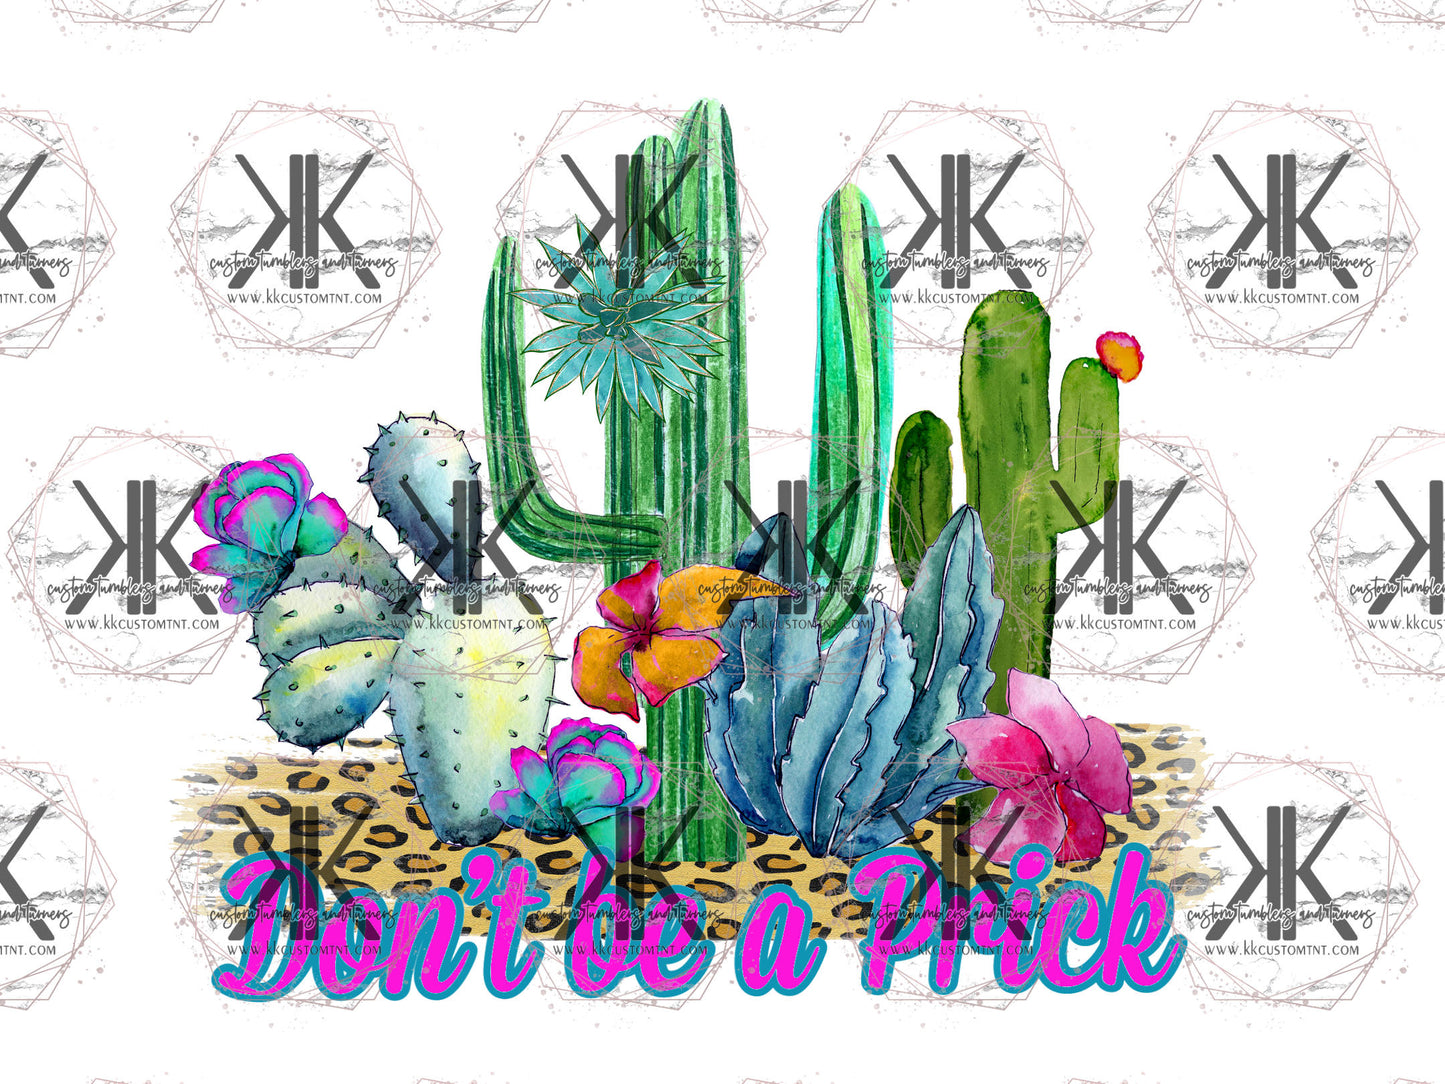 DONT BE A PRICK 3 **Digital Download Only**